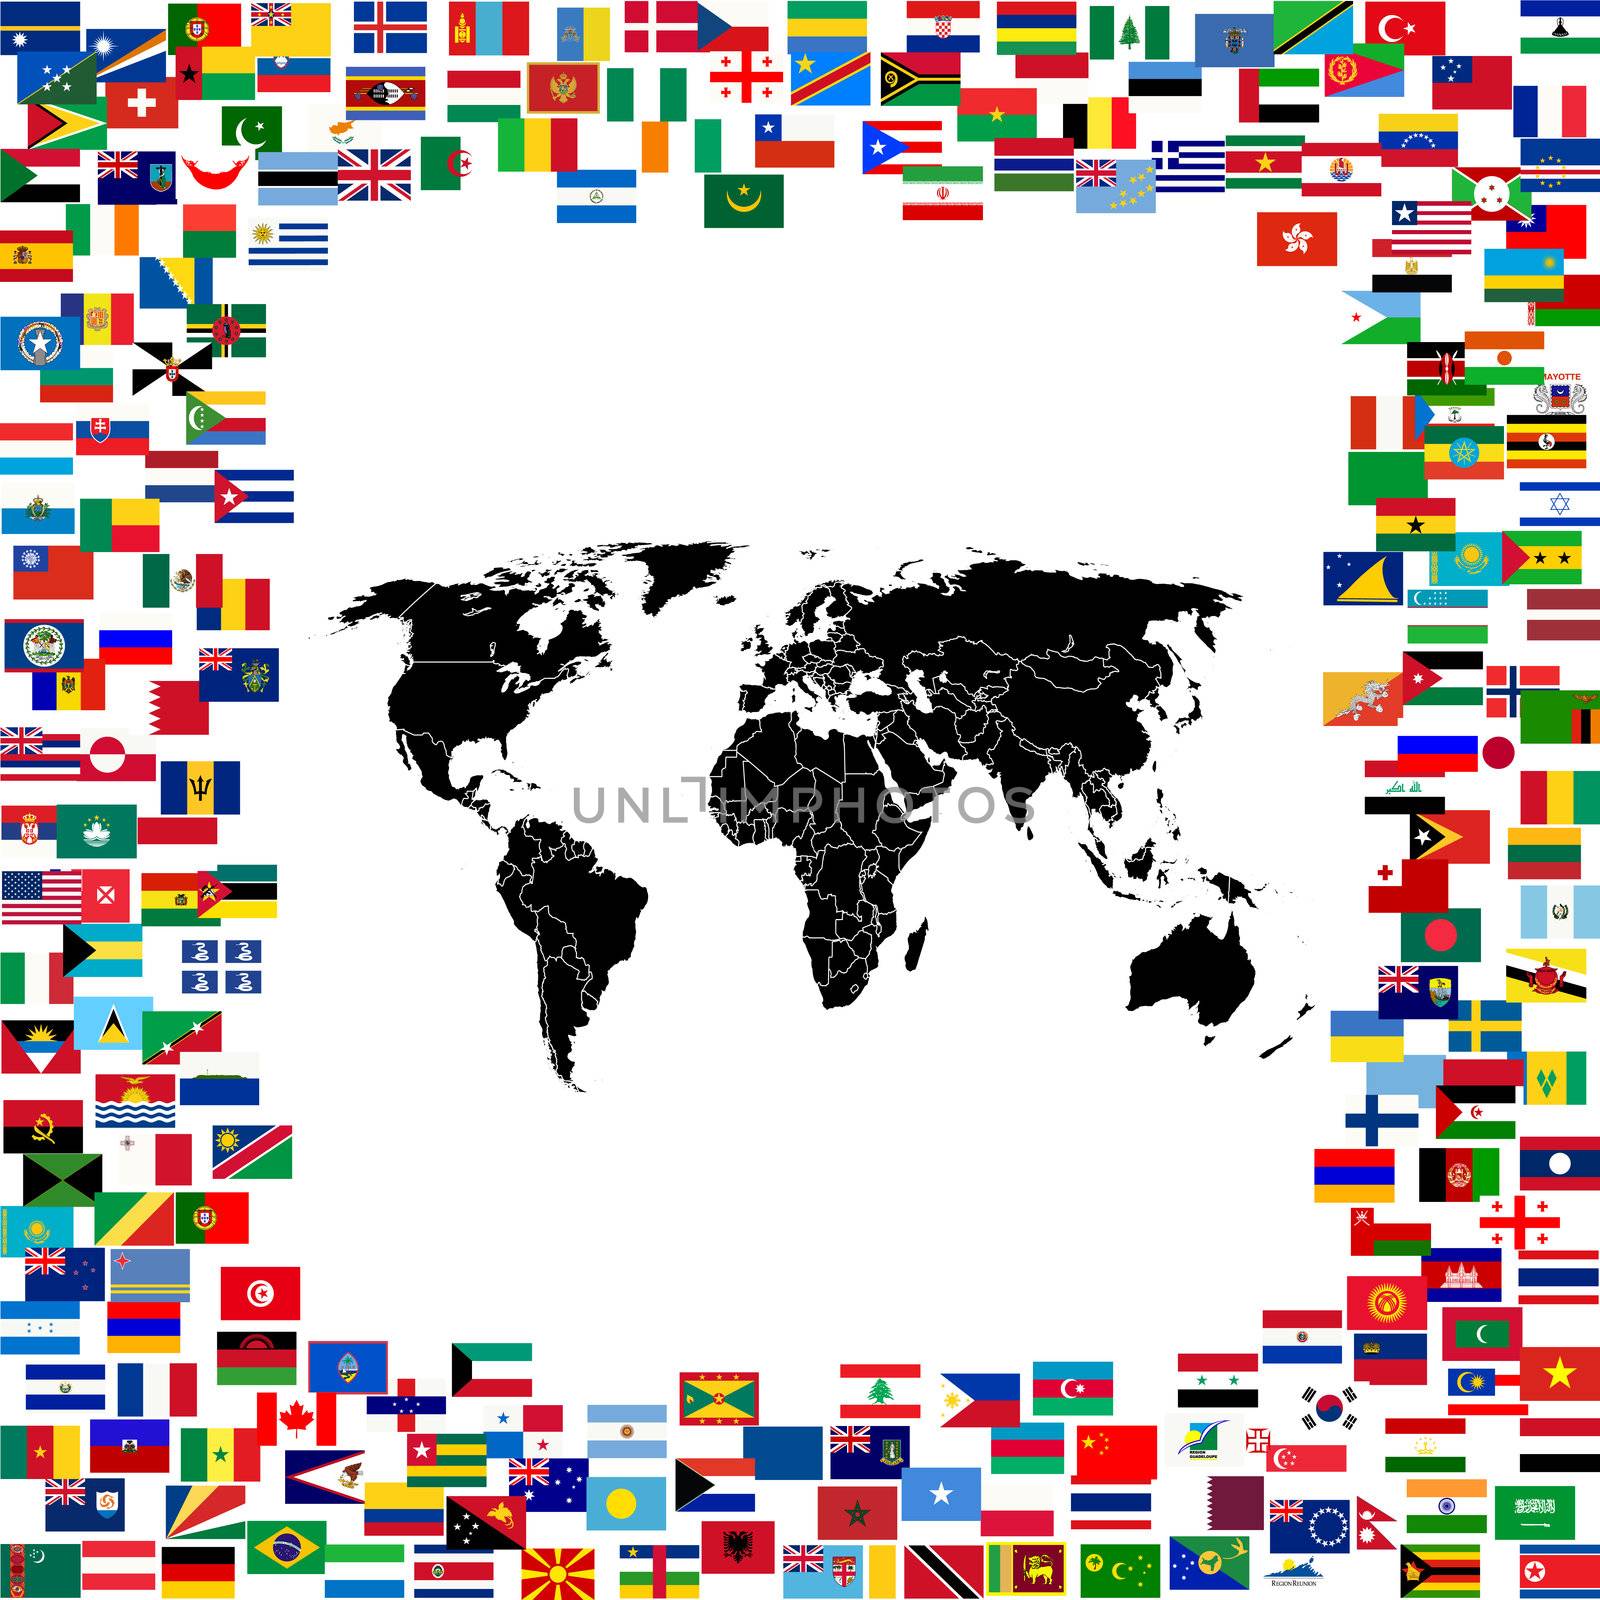 World map framed with world flags